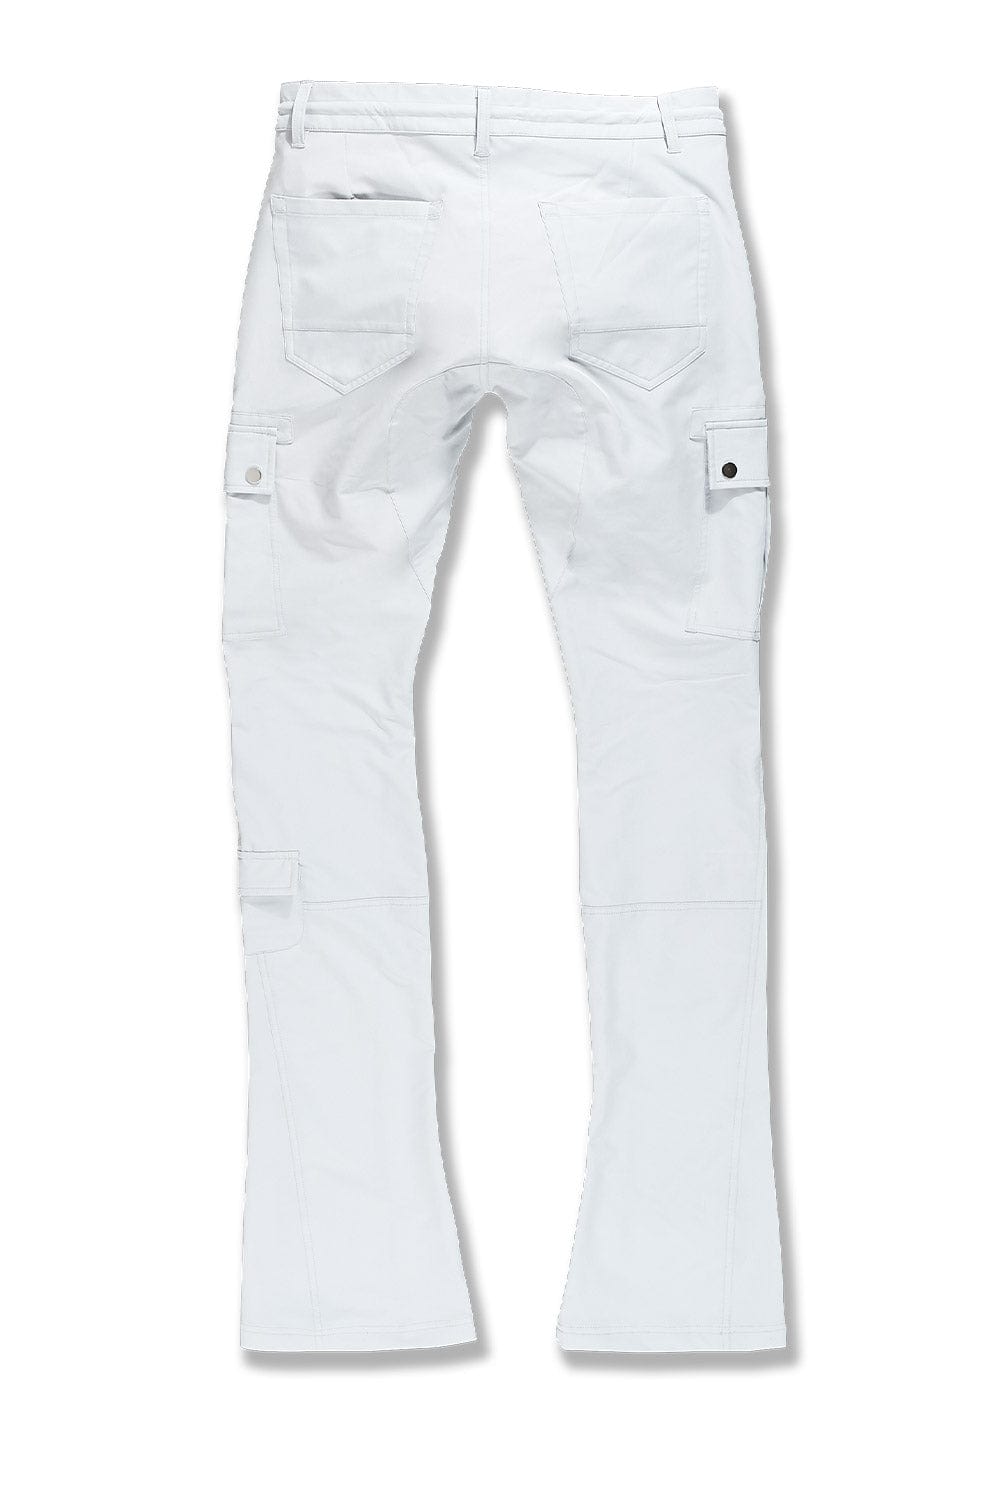 BB Martin Stacked - Rodeo Cargo Pants